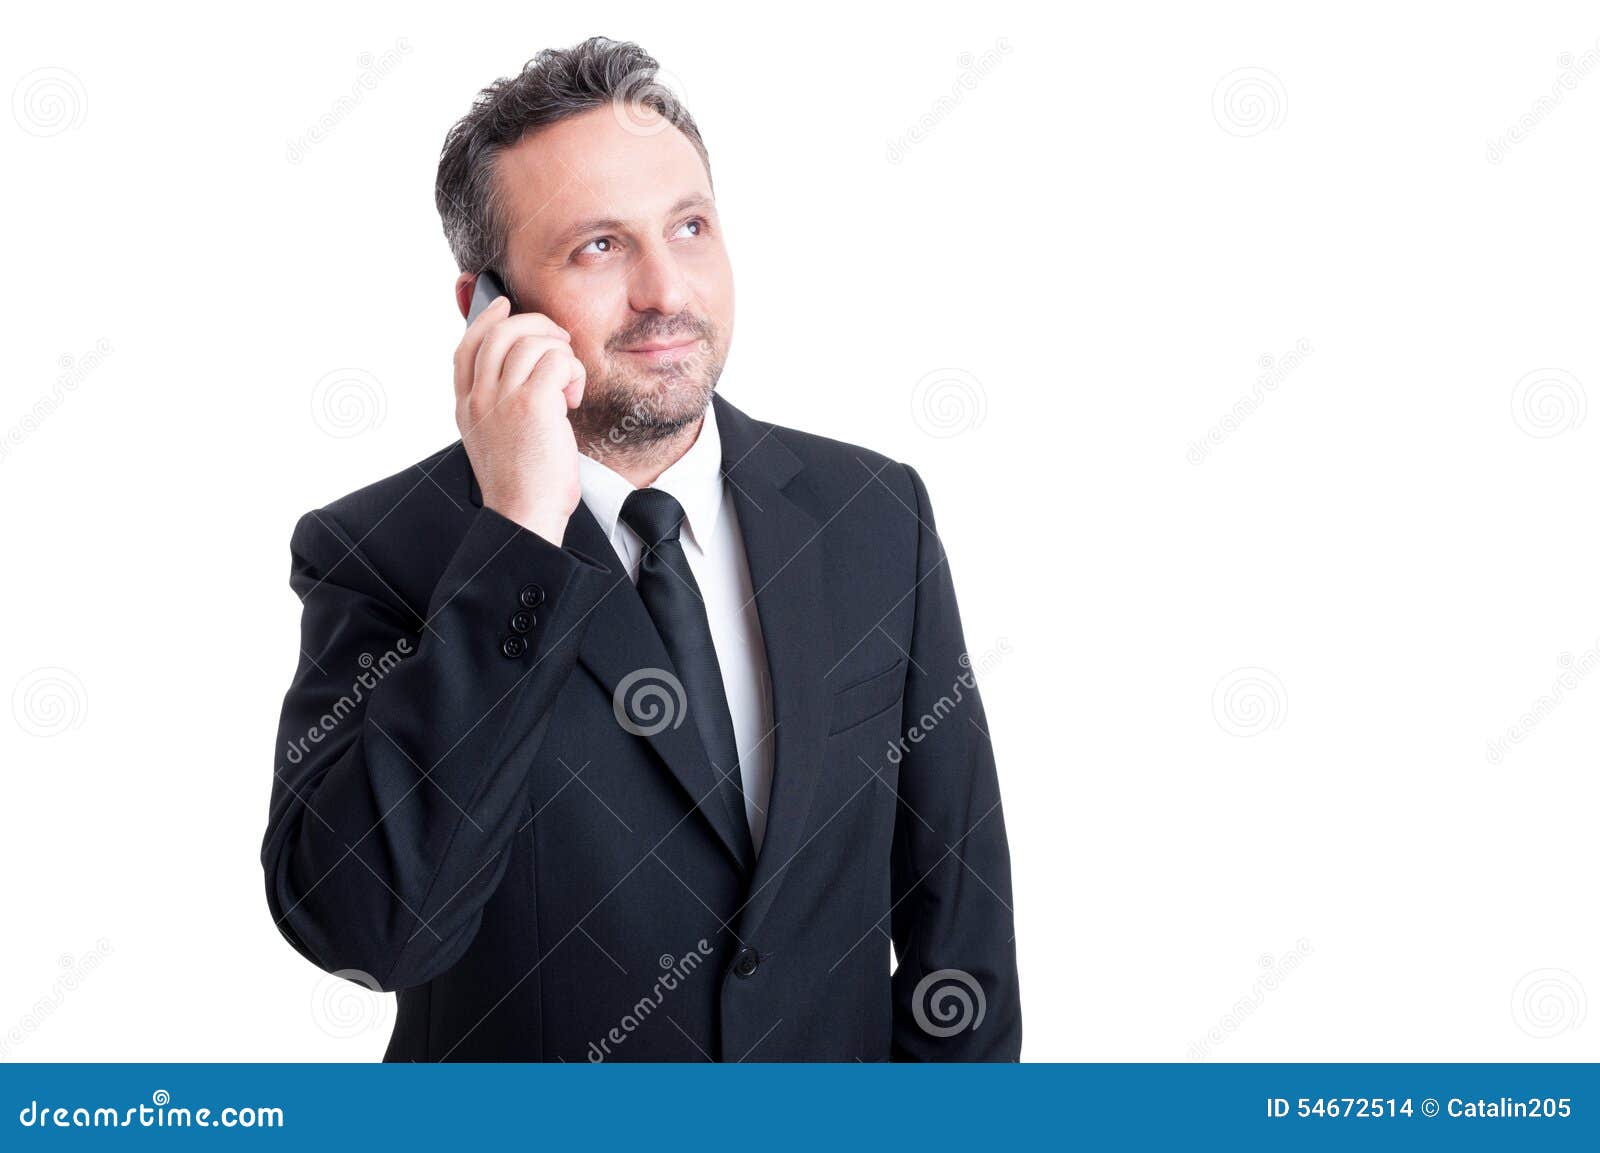 Confident business manager talking on the phone wearing black suit and tie